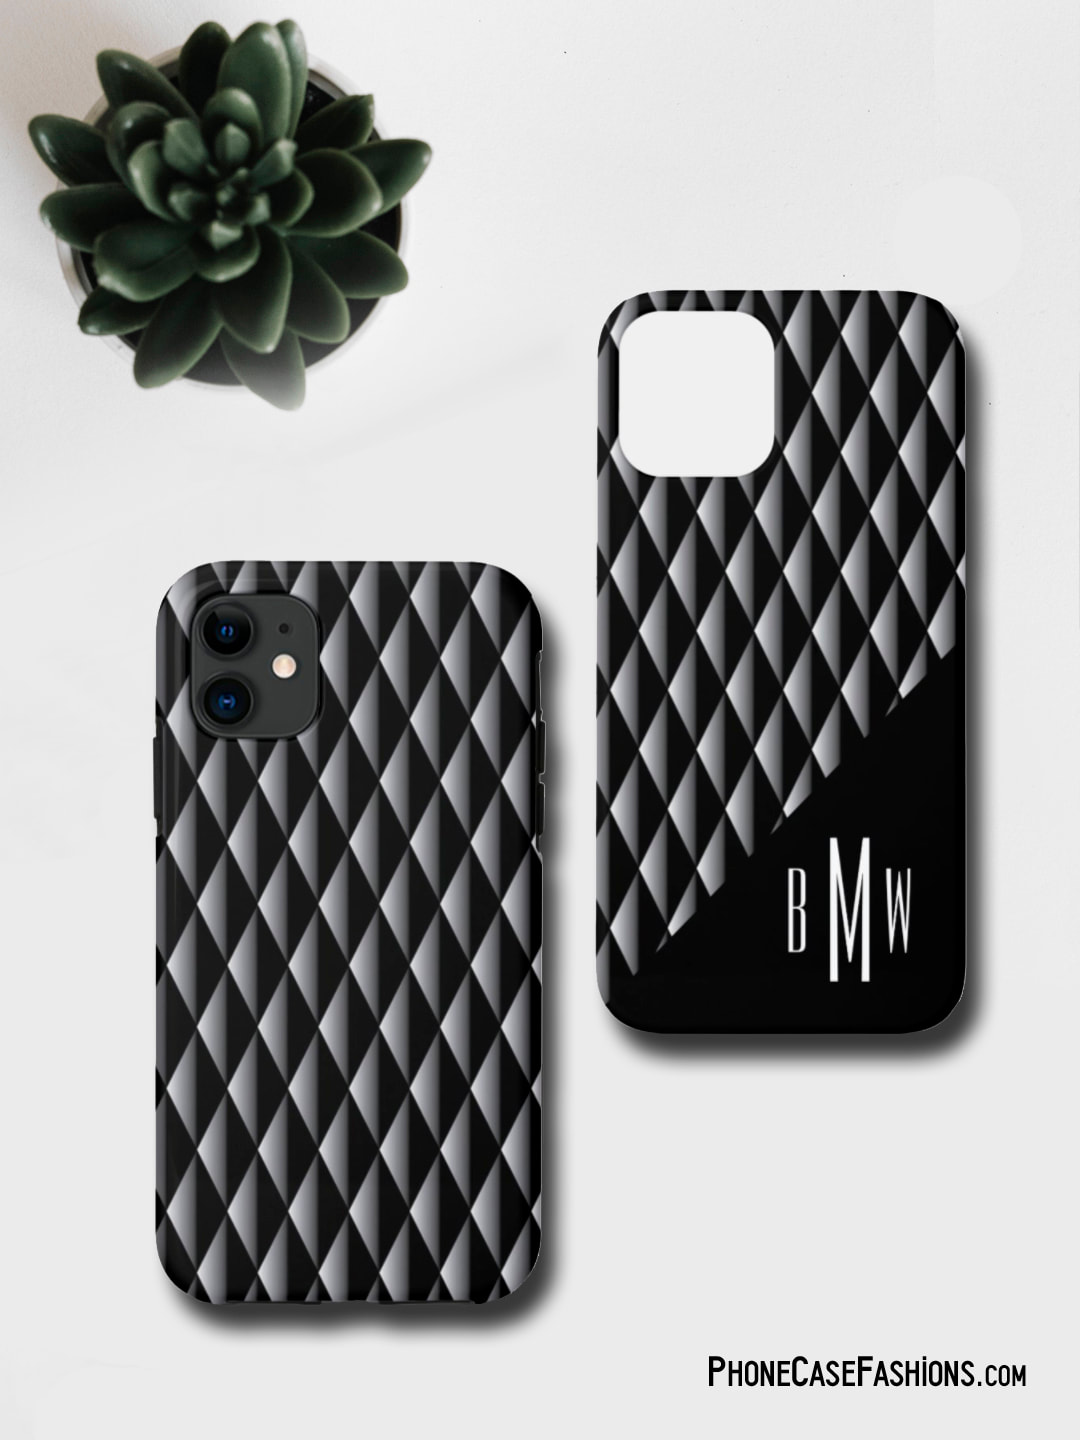 3-D look gray-to-black diamond pattern. Add your initials, monogram, name or leave the cool pattern to grab compliements. Don't hide behind an ugly phone case, design one as unique as you are. (Great Father's Day, birthday or Christmas gift!) Shop PhoneCaseFashions.com